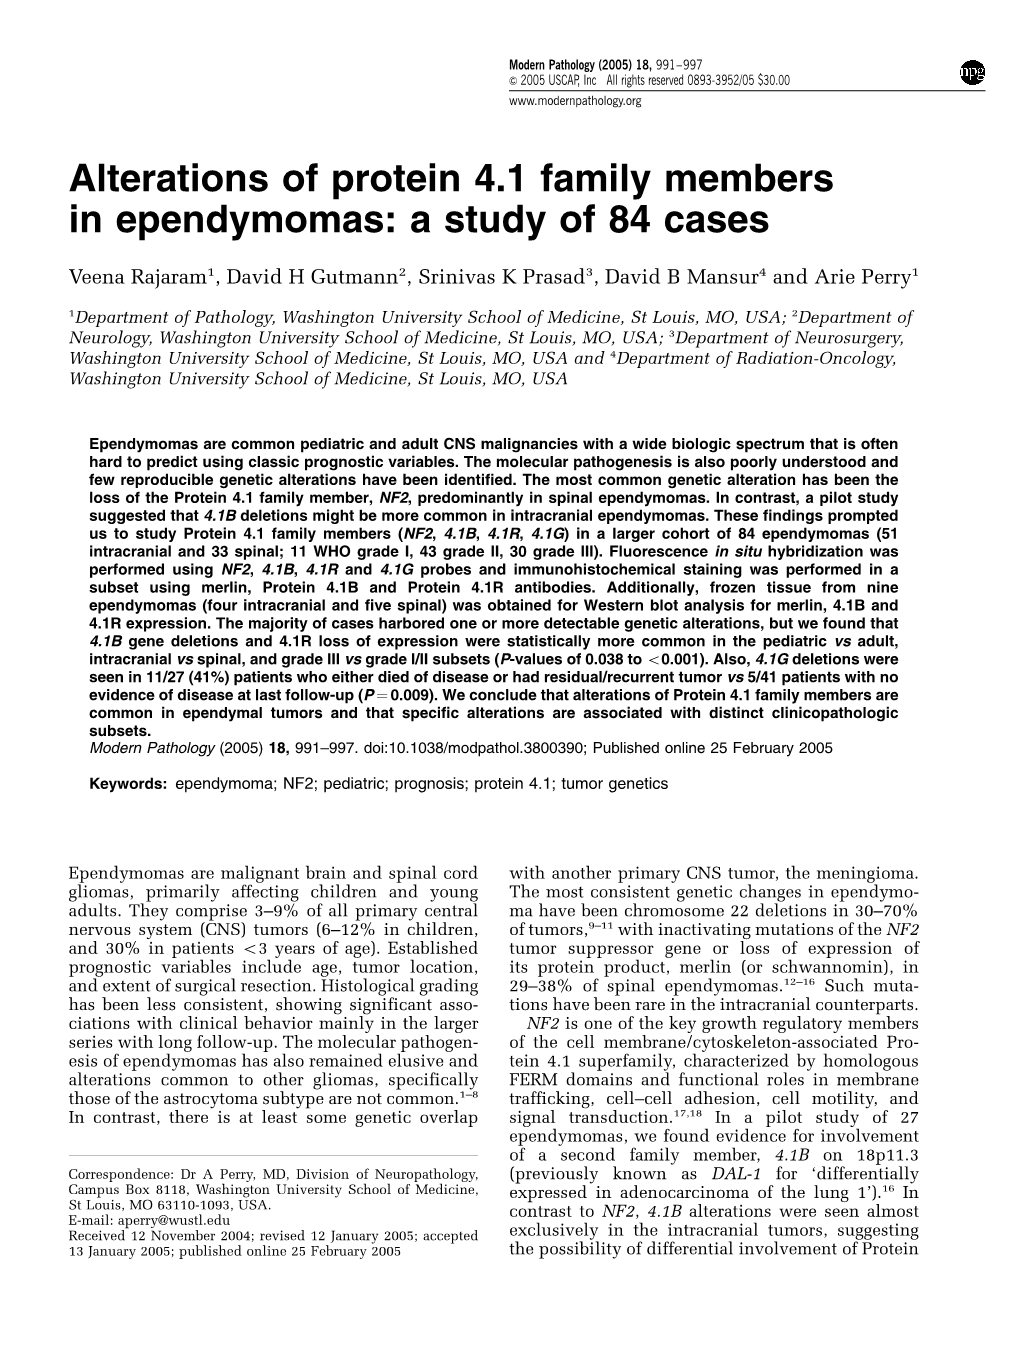 Alterations of Protein 4.1 Family Members in Ependymomas: a Study of 84 Cases